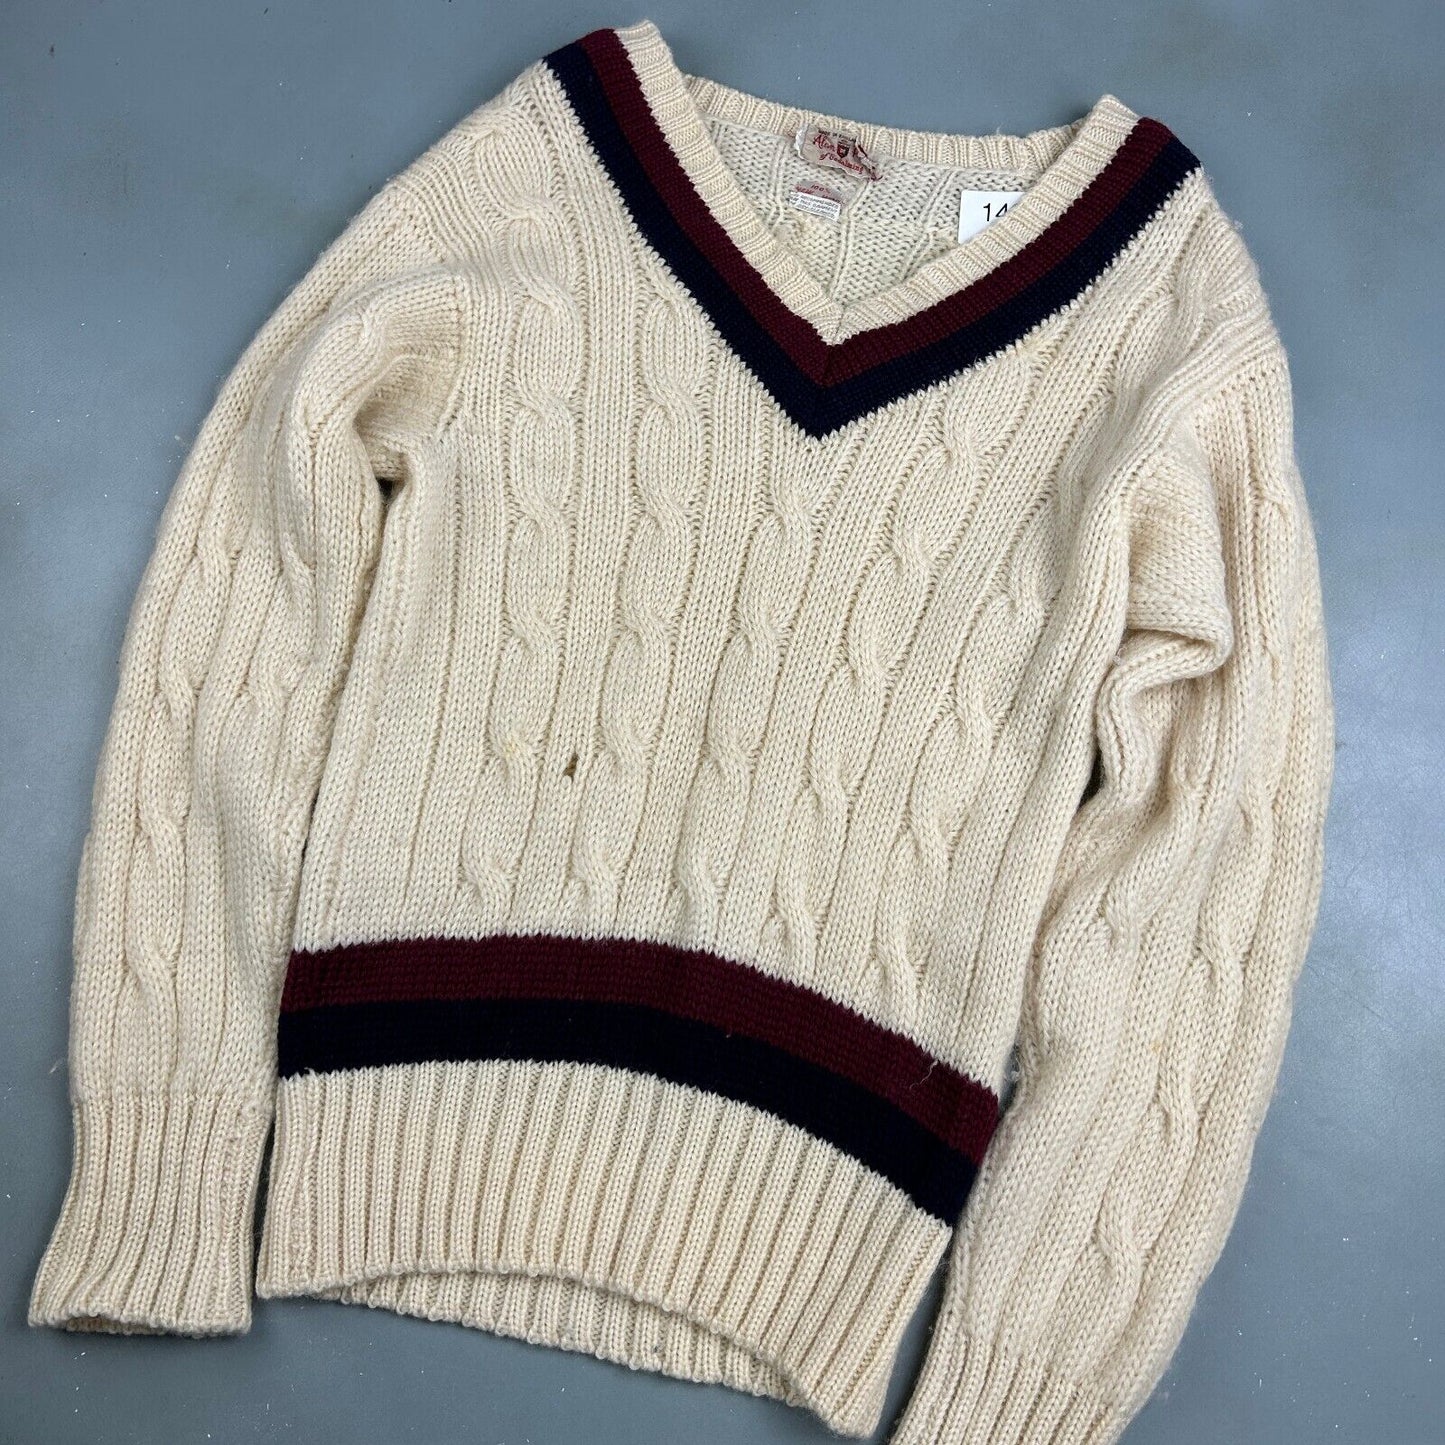 VINTAGE 70s | Cricket Tennis Wool Knit Sweater sz Sm Adult Made in England